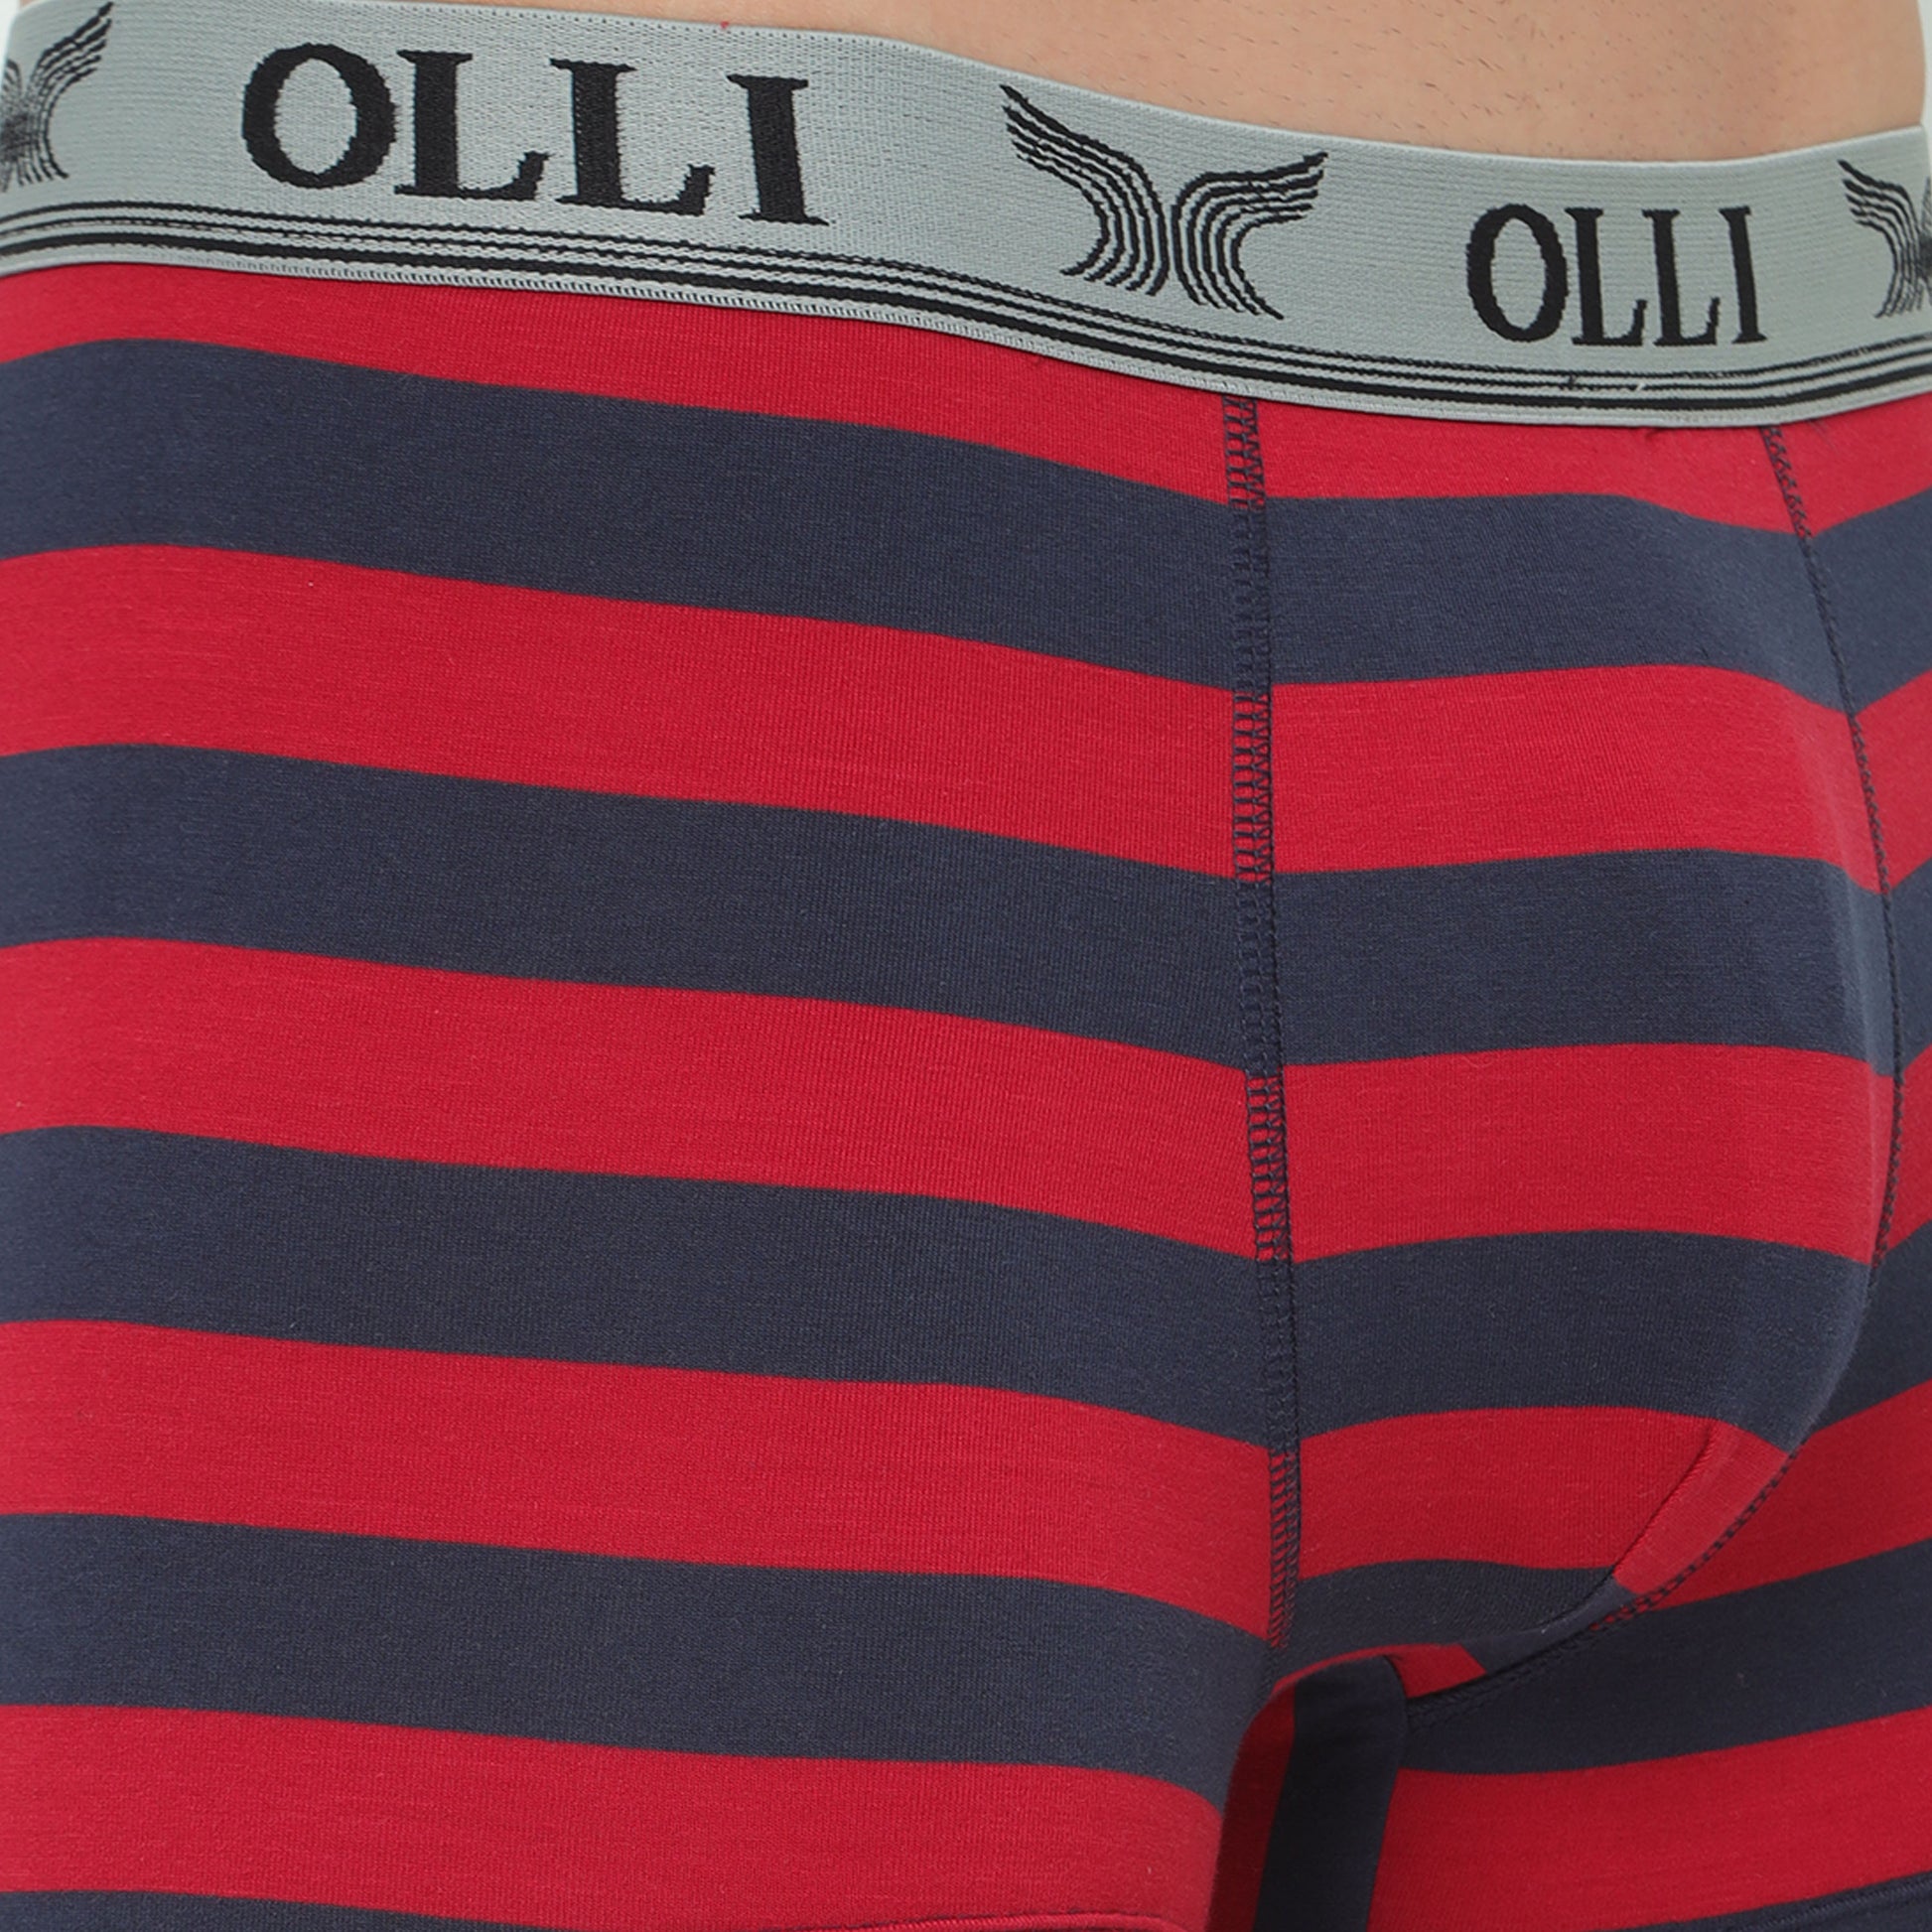 Men's Super Combed Cotton Maroon and Navy Trunk